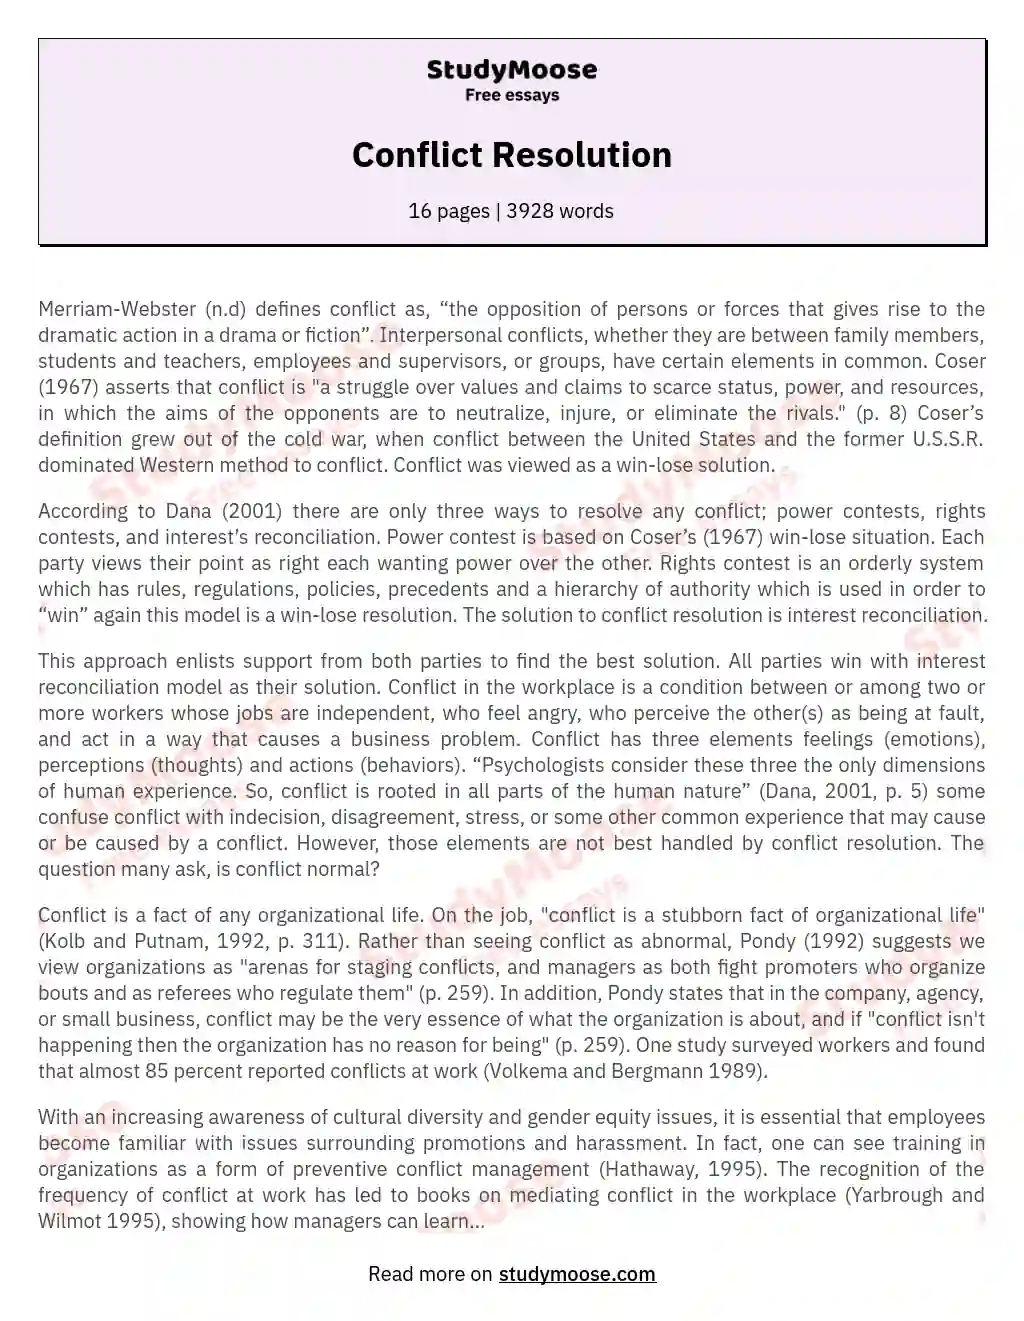 teamwork and conflict resolution essay